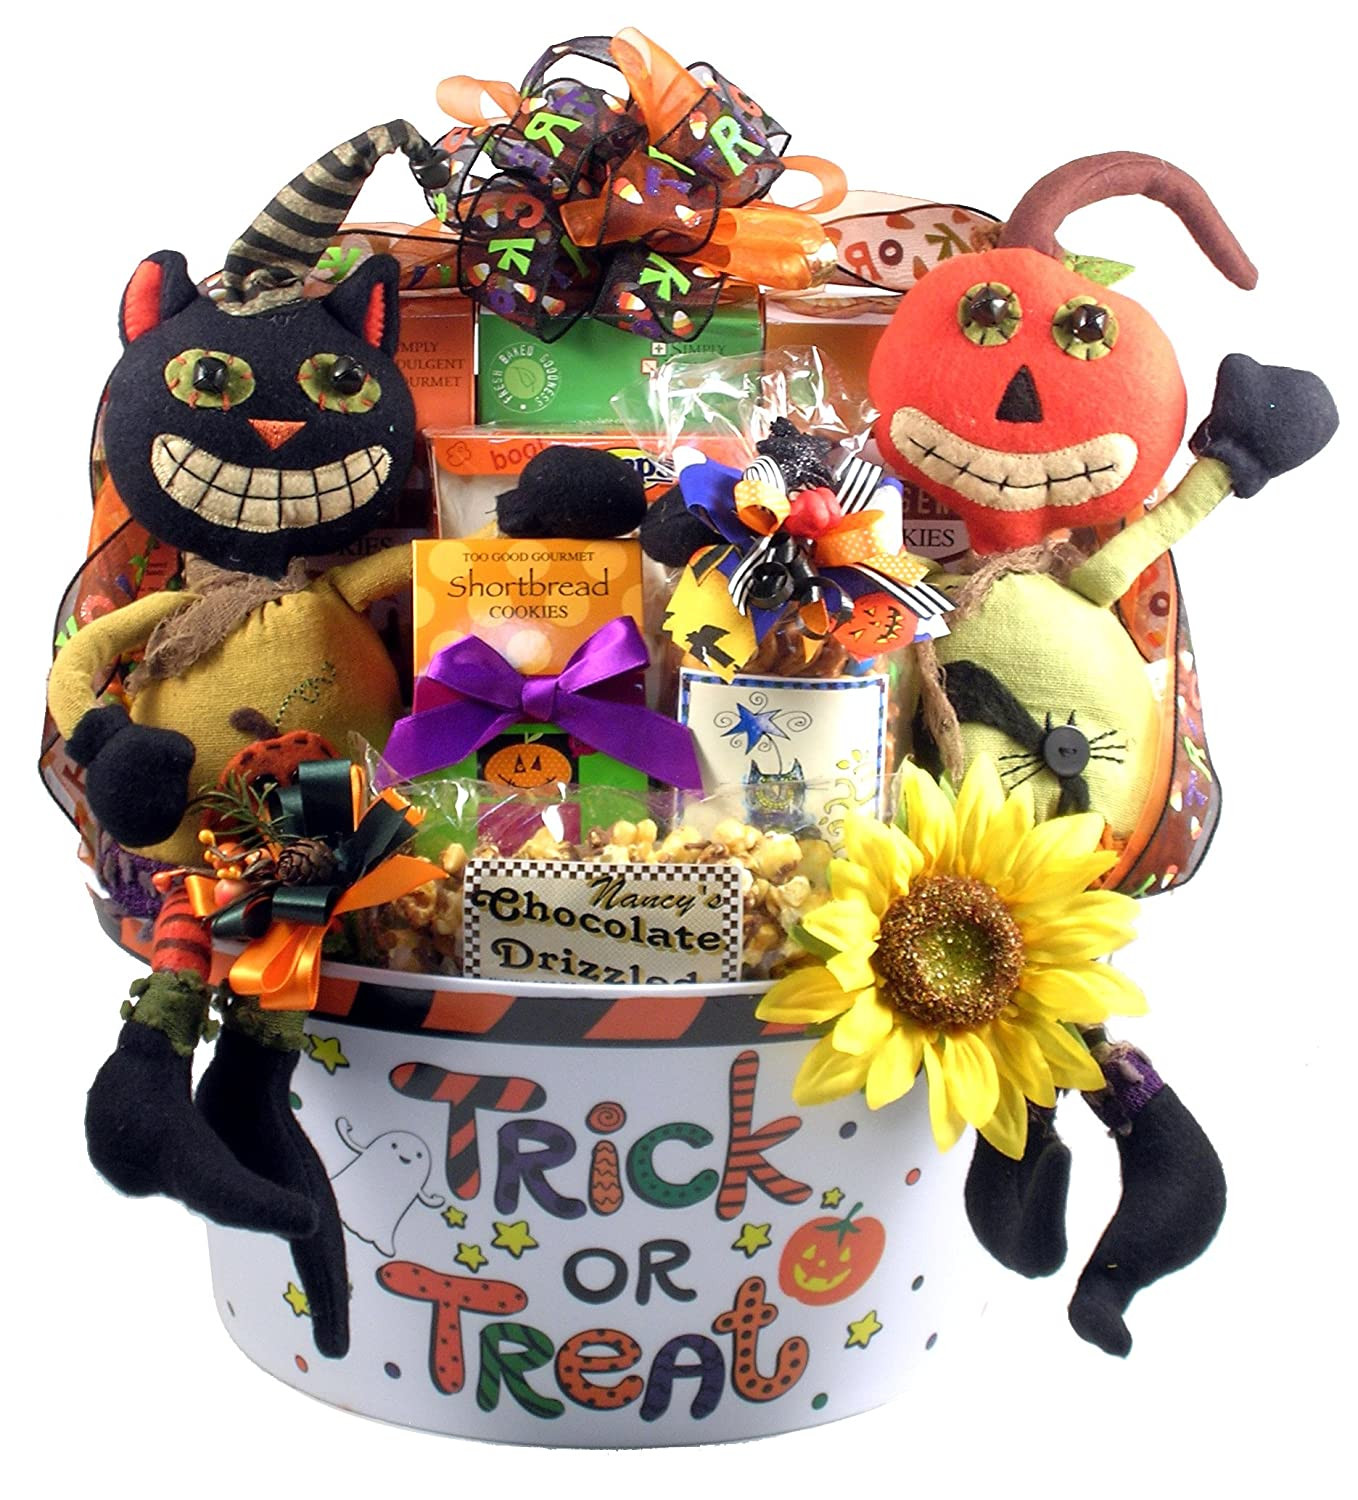 Halloween Gift Baskets Ideas
 Best Halloween Gift Baskets for Adults and Kids